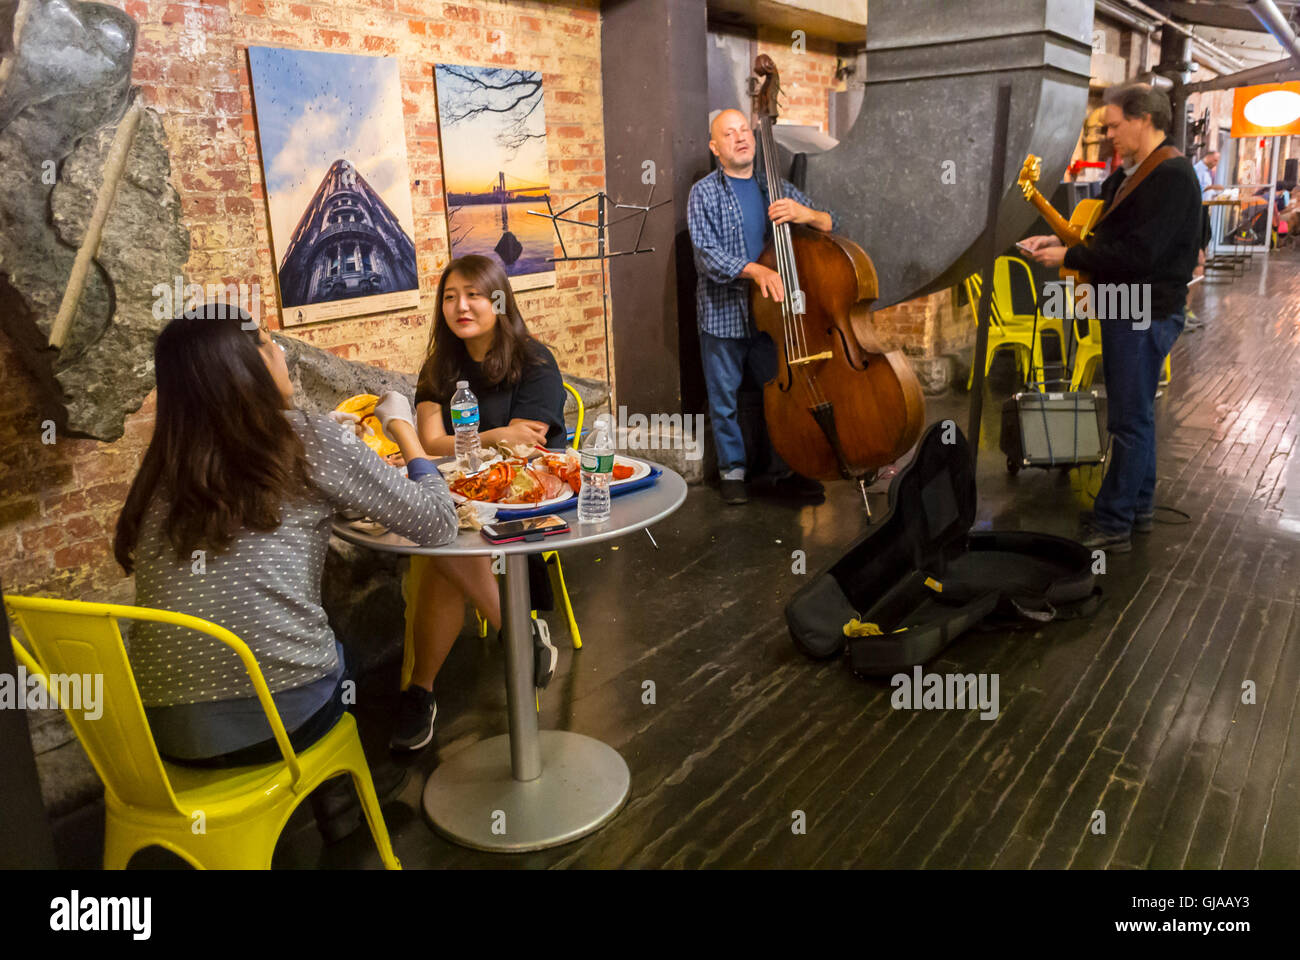 New York City, NY, USA, Chinese Tourists sharing Meals at Table People CHelsea Market, Live Music Performing Stock Photo